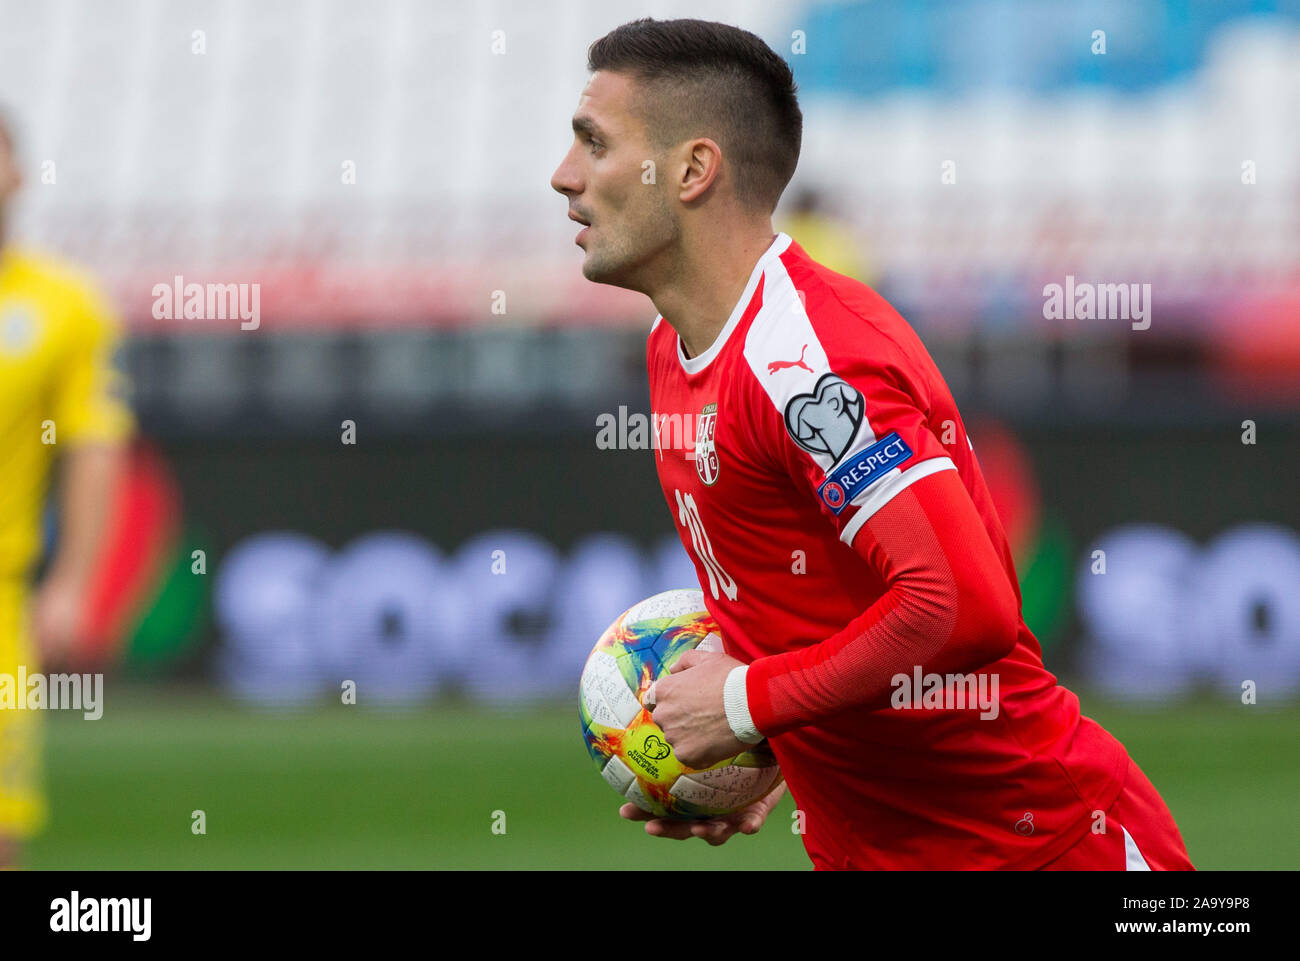 Belgrade, Serbia. 17th Nov, 2019. Dusan Tadic of Serbia celebrates after scoring his goal for 1-0 in 9th minute. Credit: Nikola Krstic/Alamy Live News Stock Photo